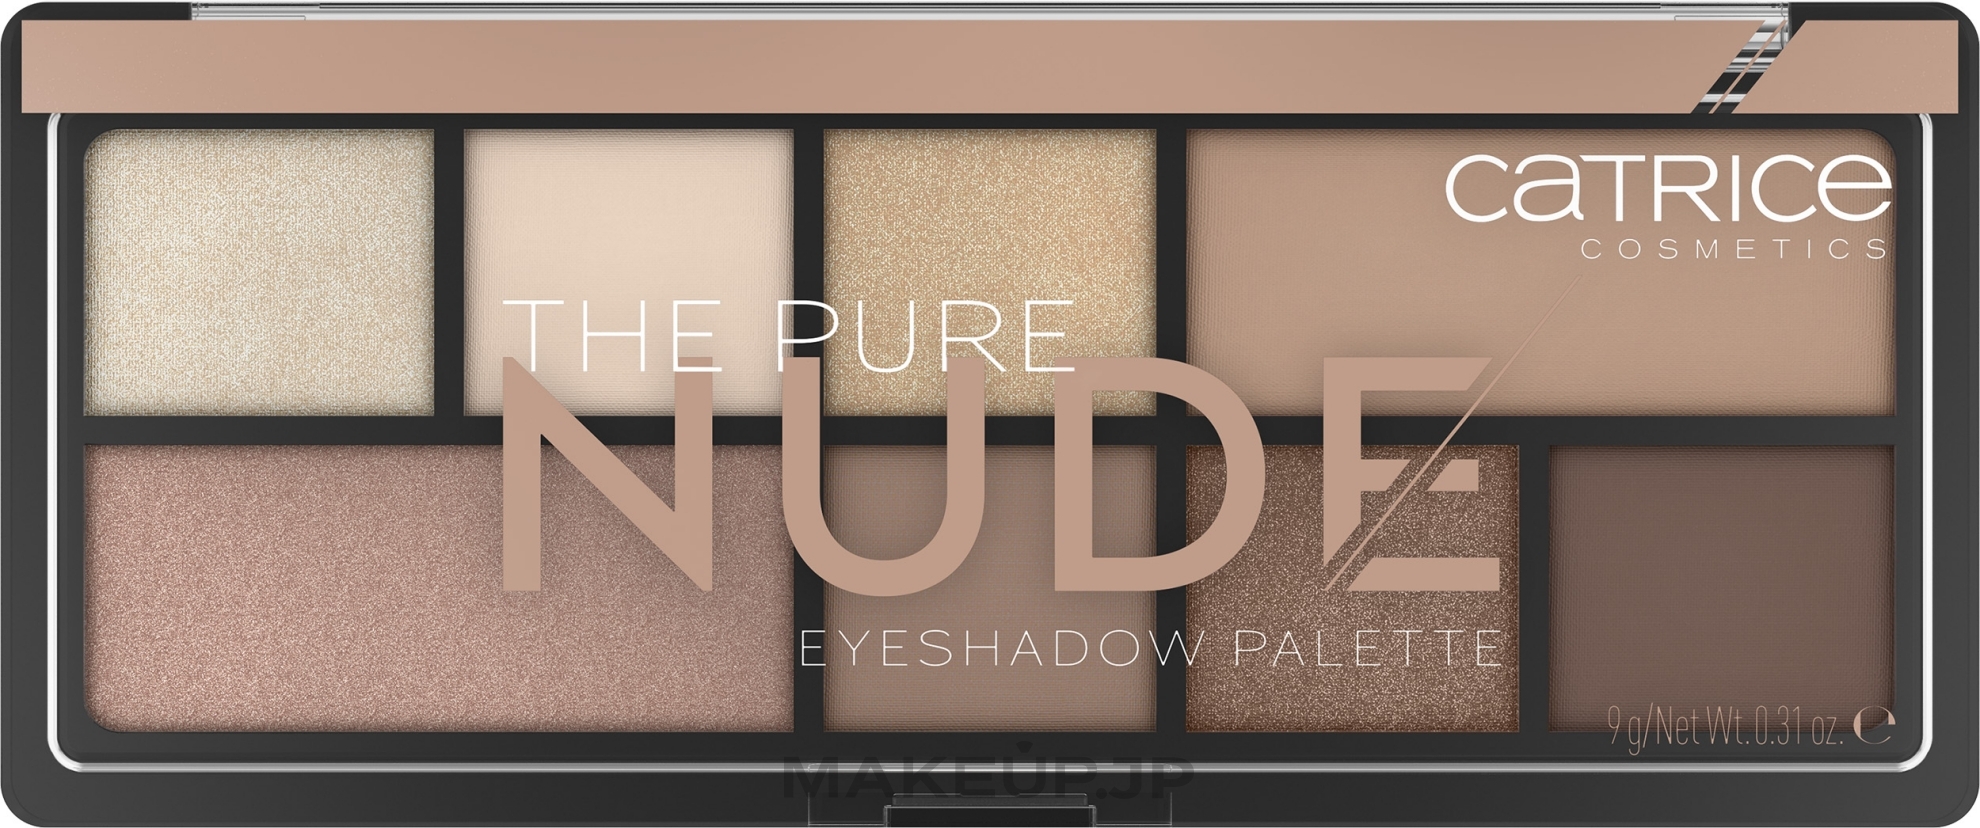 Eyeshadow Palette - Catrice The Pure Nude Eyeshadow Palette — photo 9 g